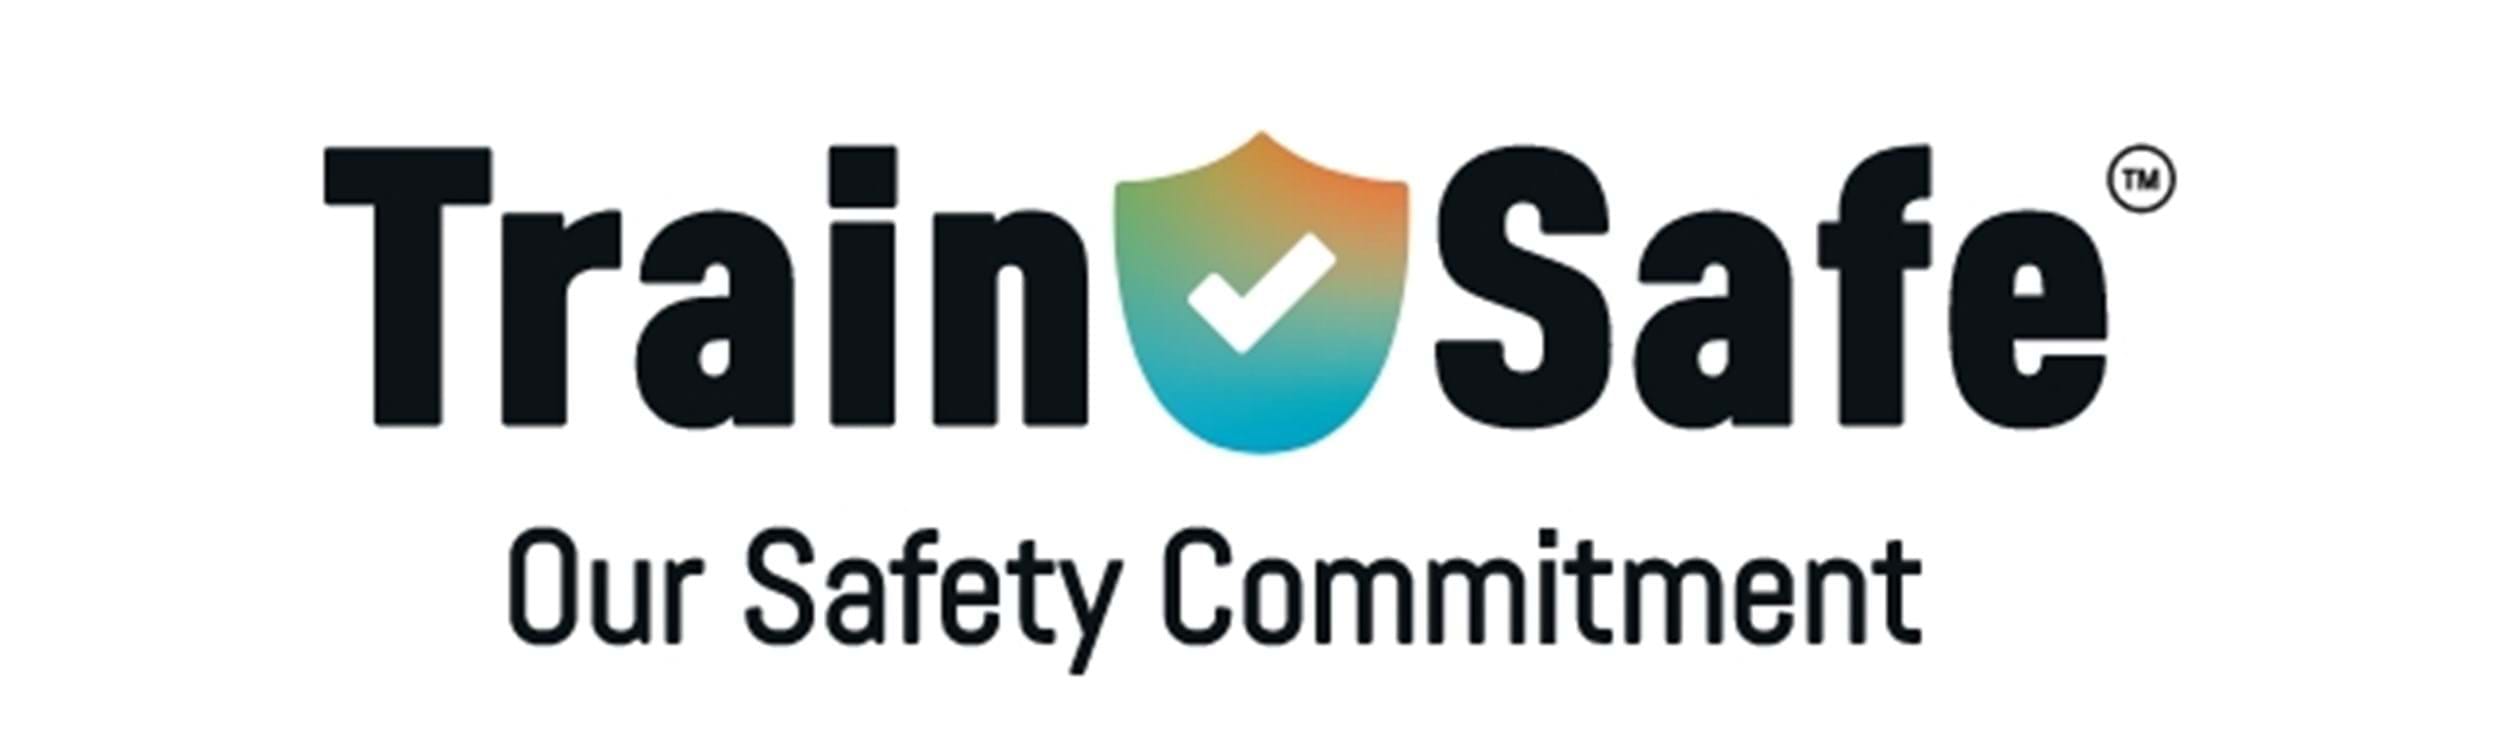 Trainsafe - our safety commitment